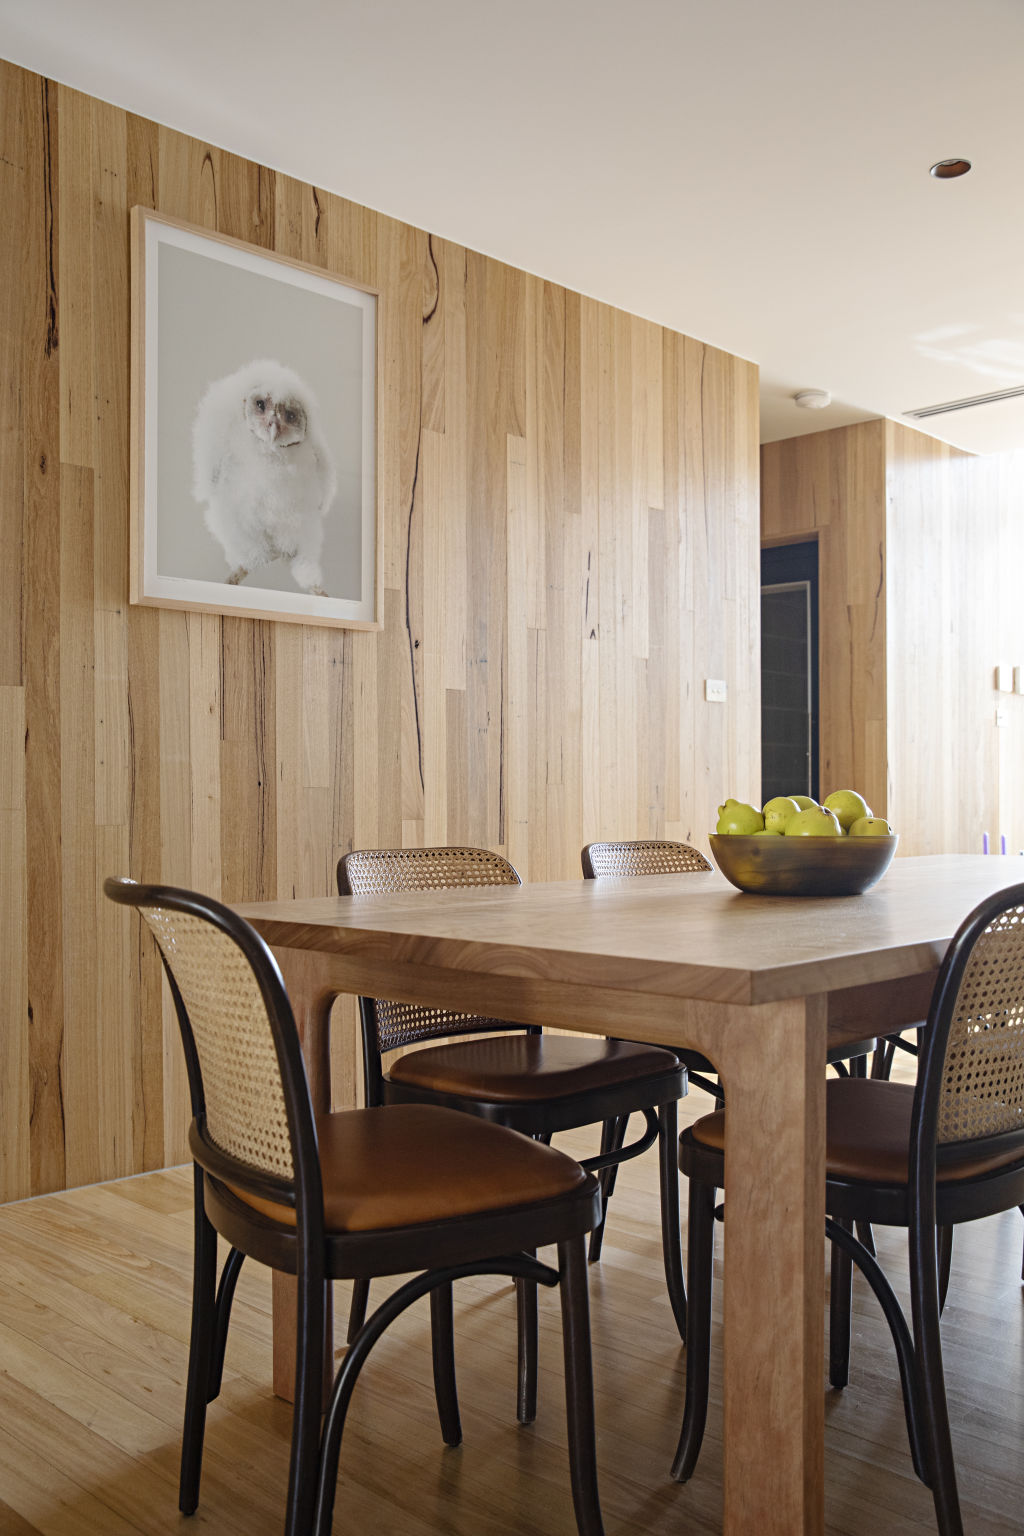 A print by artist Leila Jeffreys sits above the custom-made dining table. Photo: Natalie Jeffcott